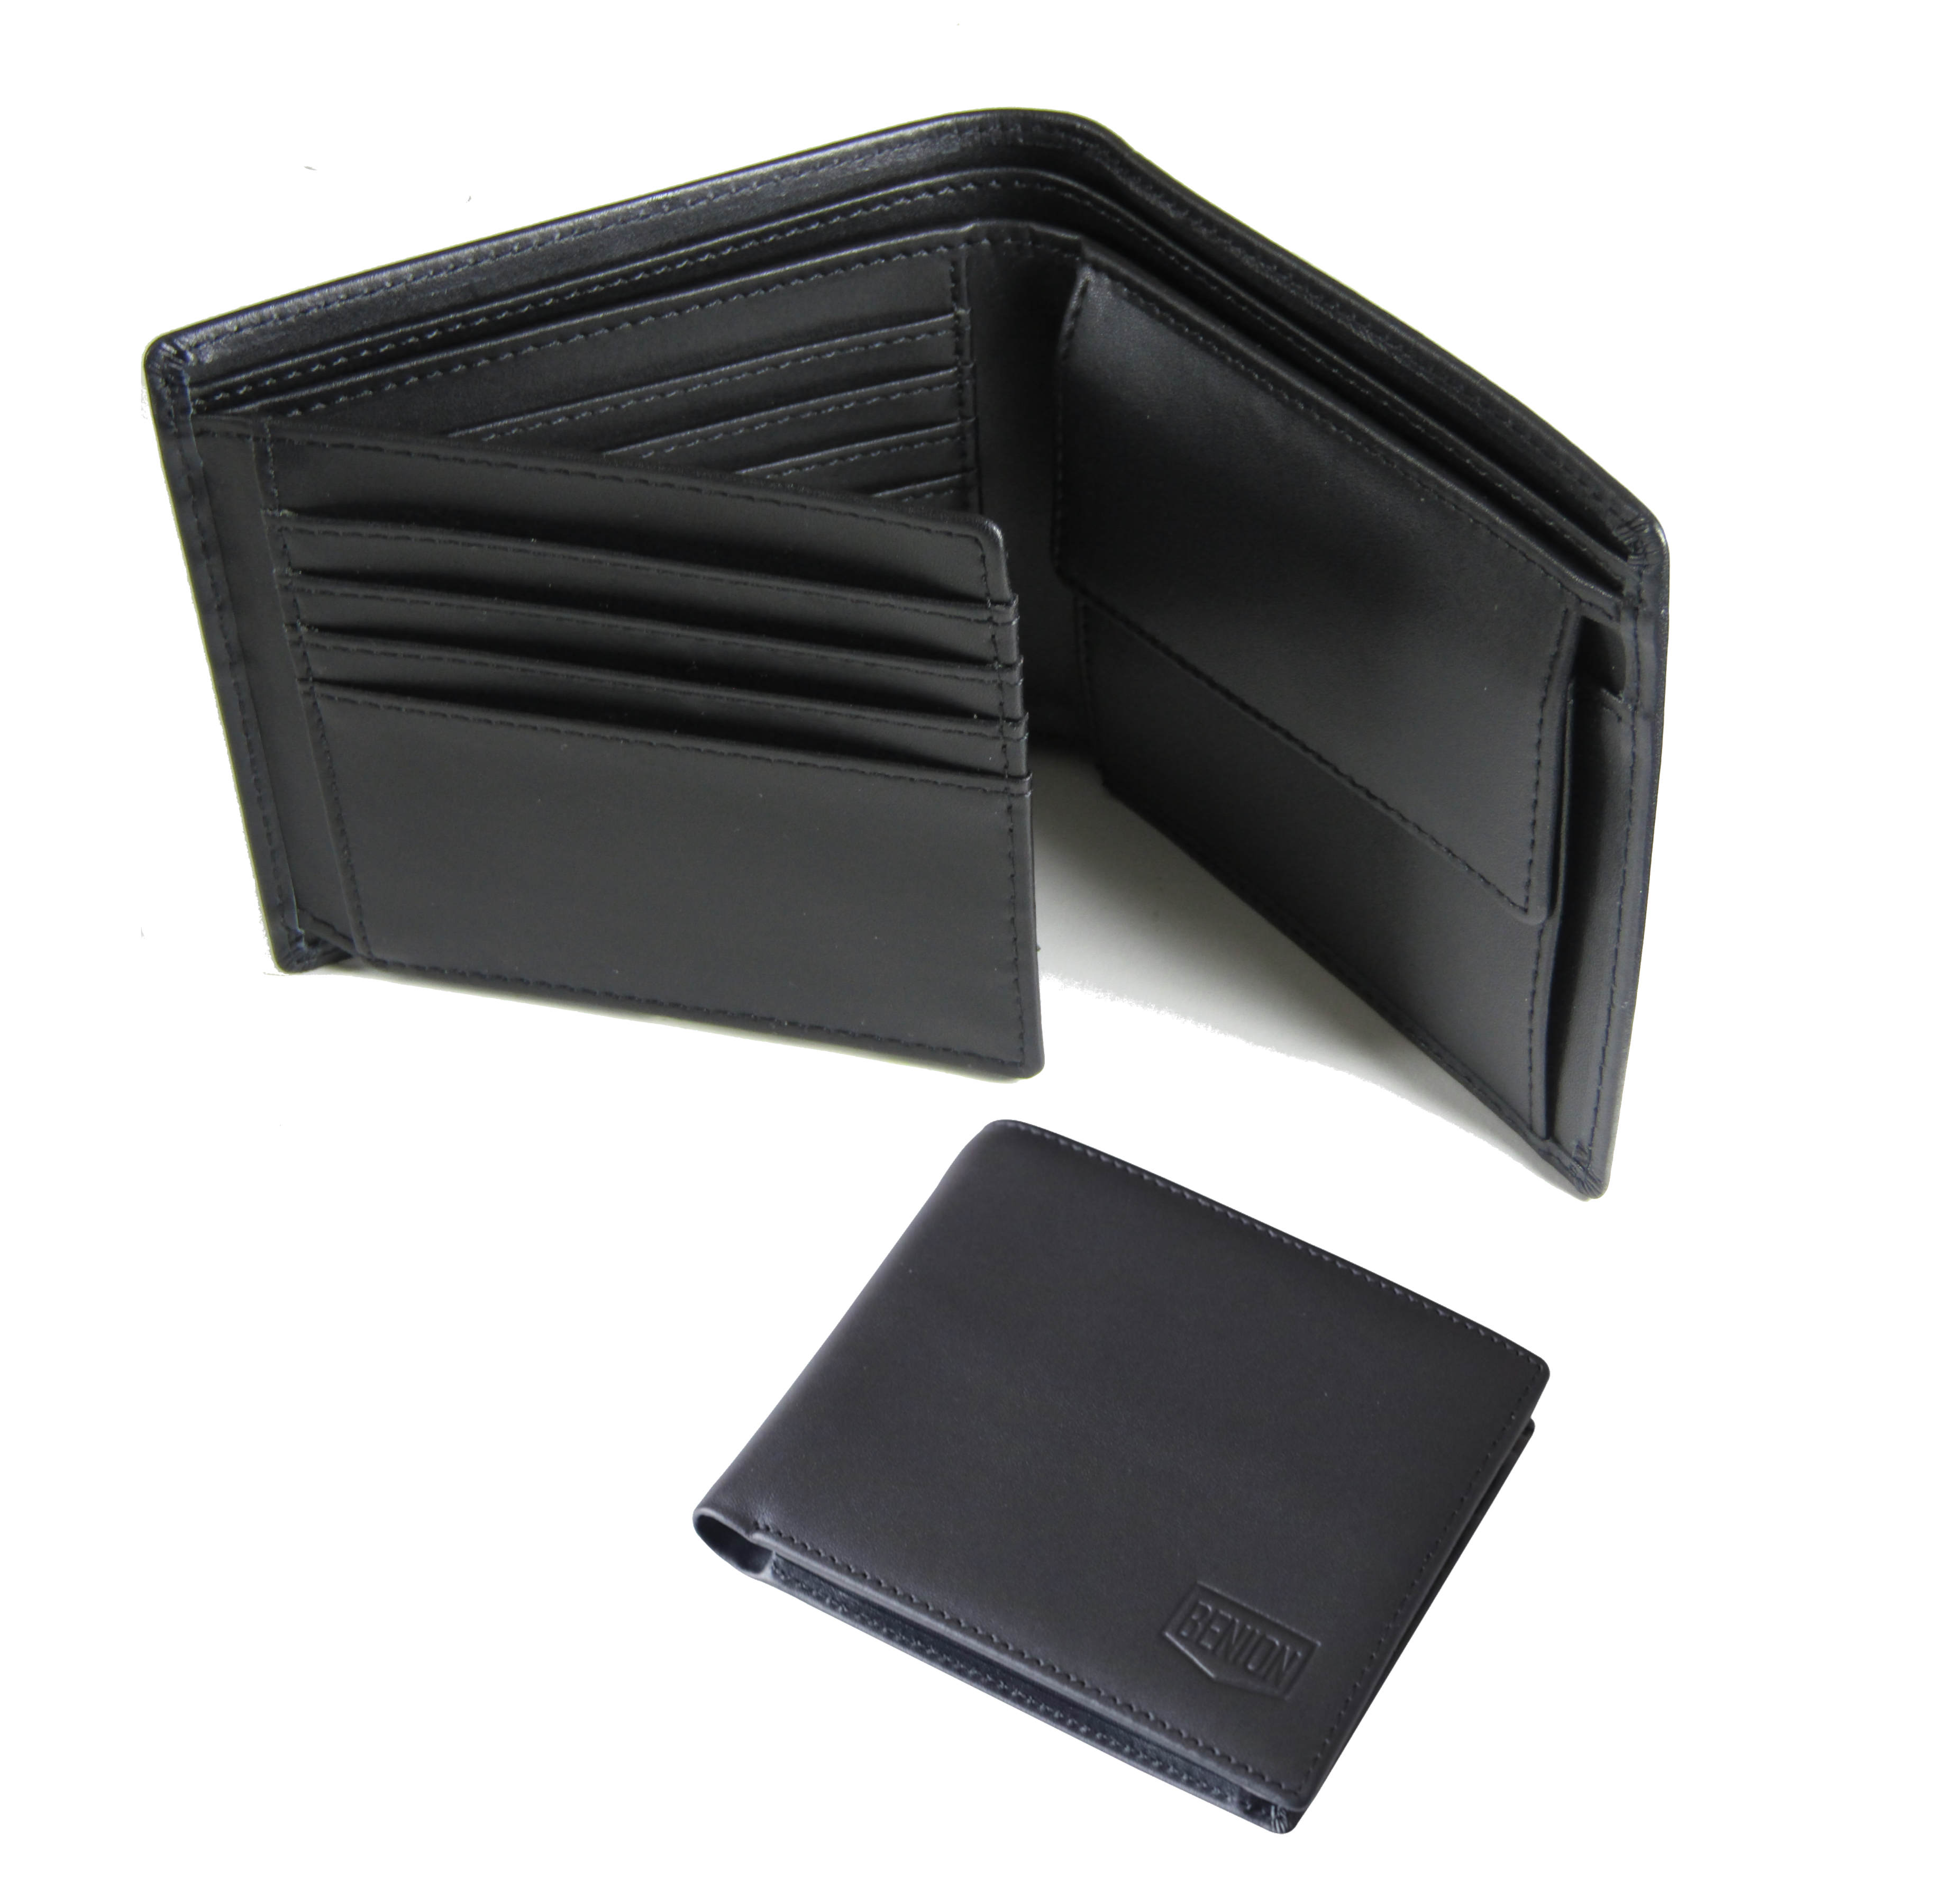 BENION Wallets Mens Slim RFID Blocking Genuine Leather with Coin Pocket, 2 Banknote Compartments, 10 Credit Card Holders (ID Window)